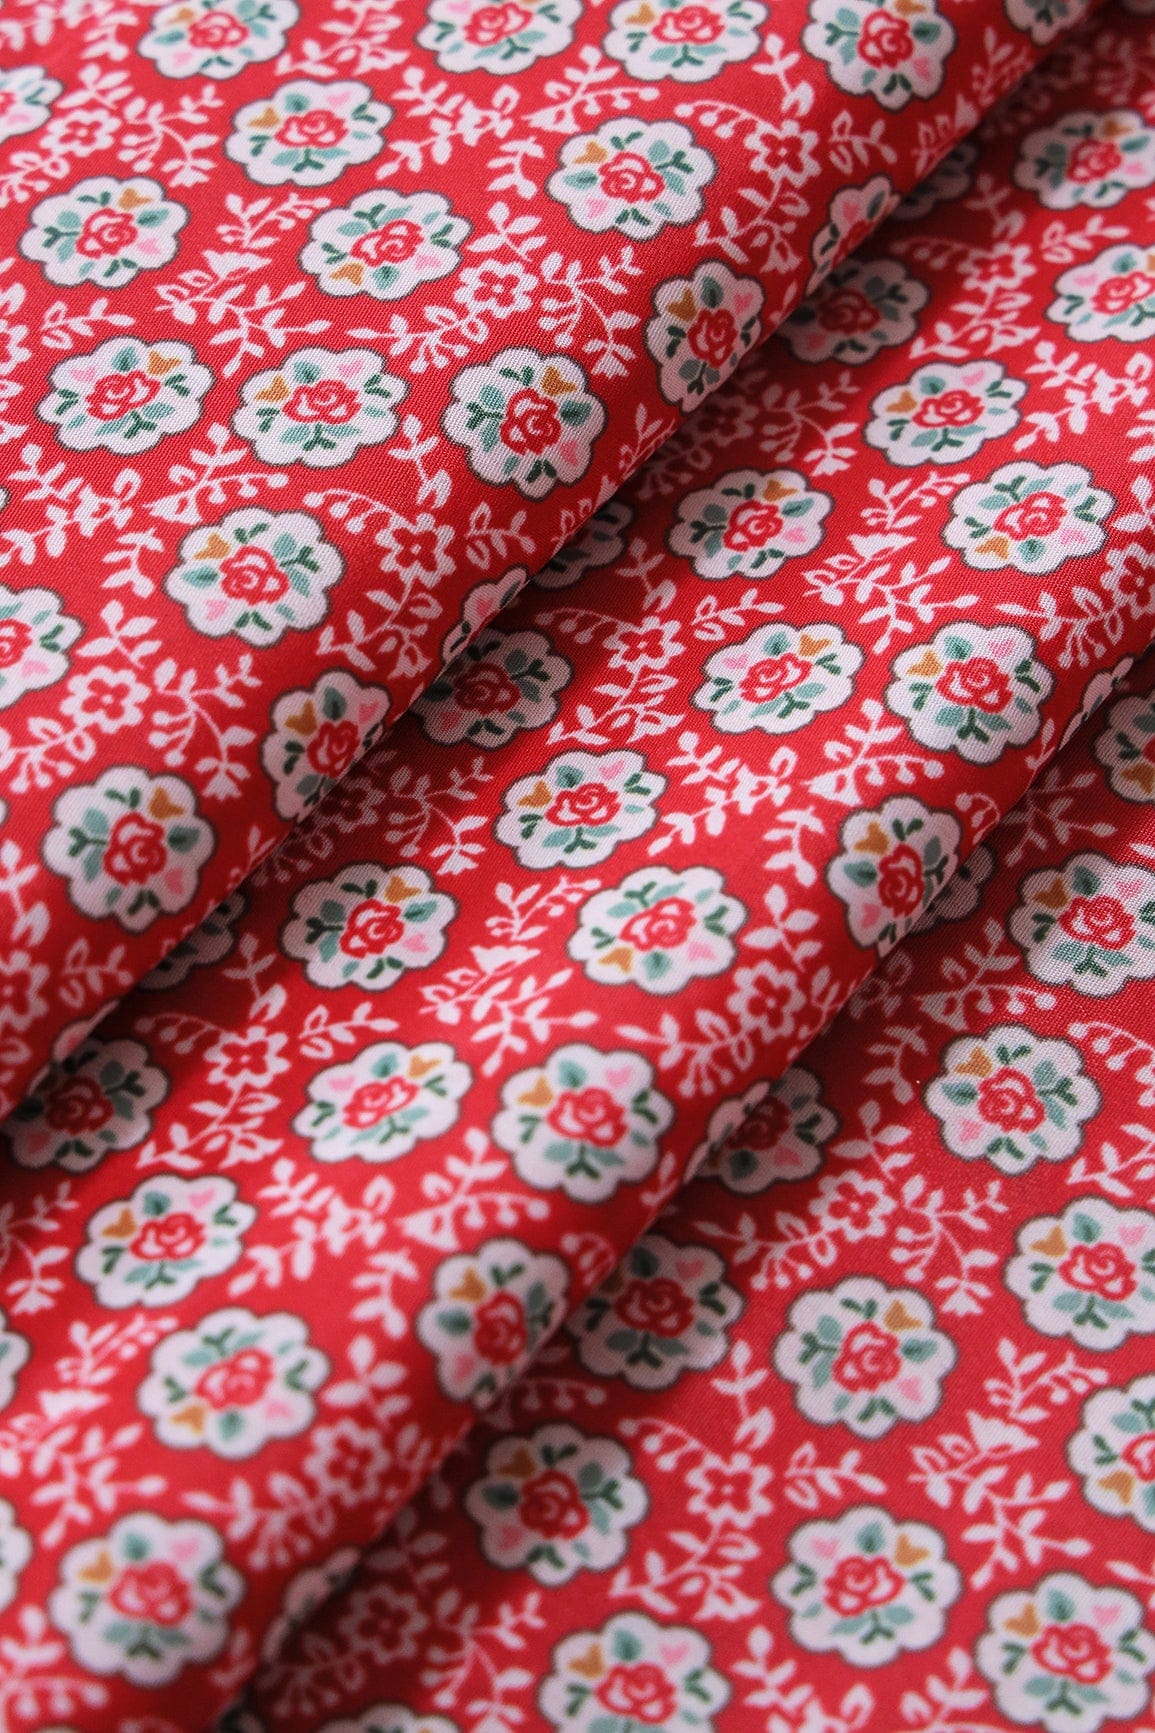 doeraa Prints White Small Floral Pattern Digital Print On Red French Crepe Fabric